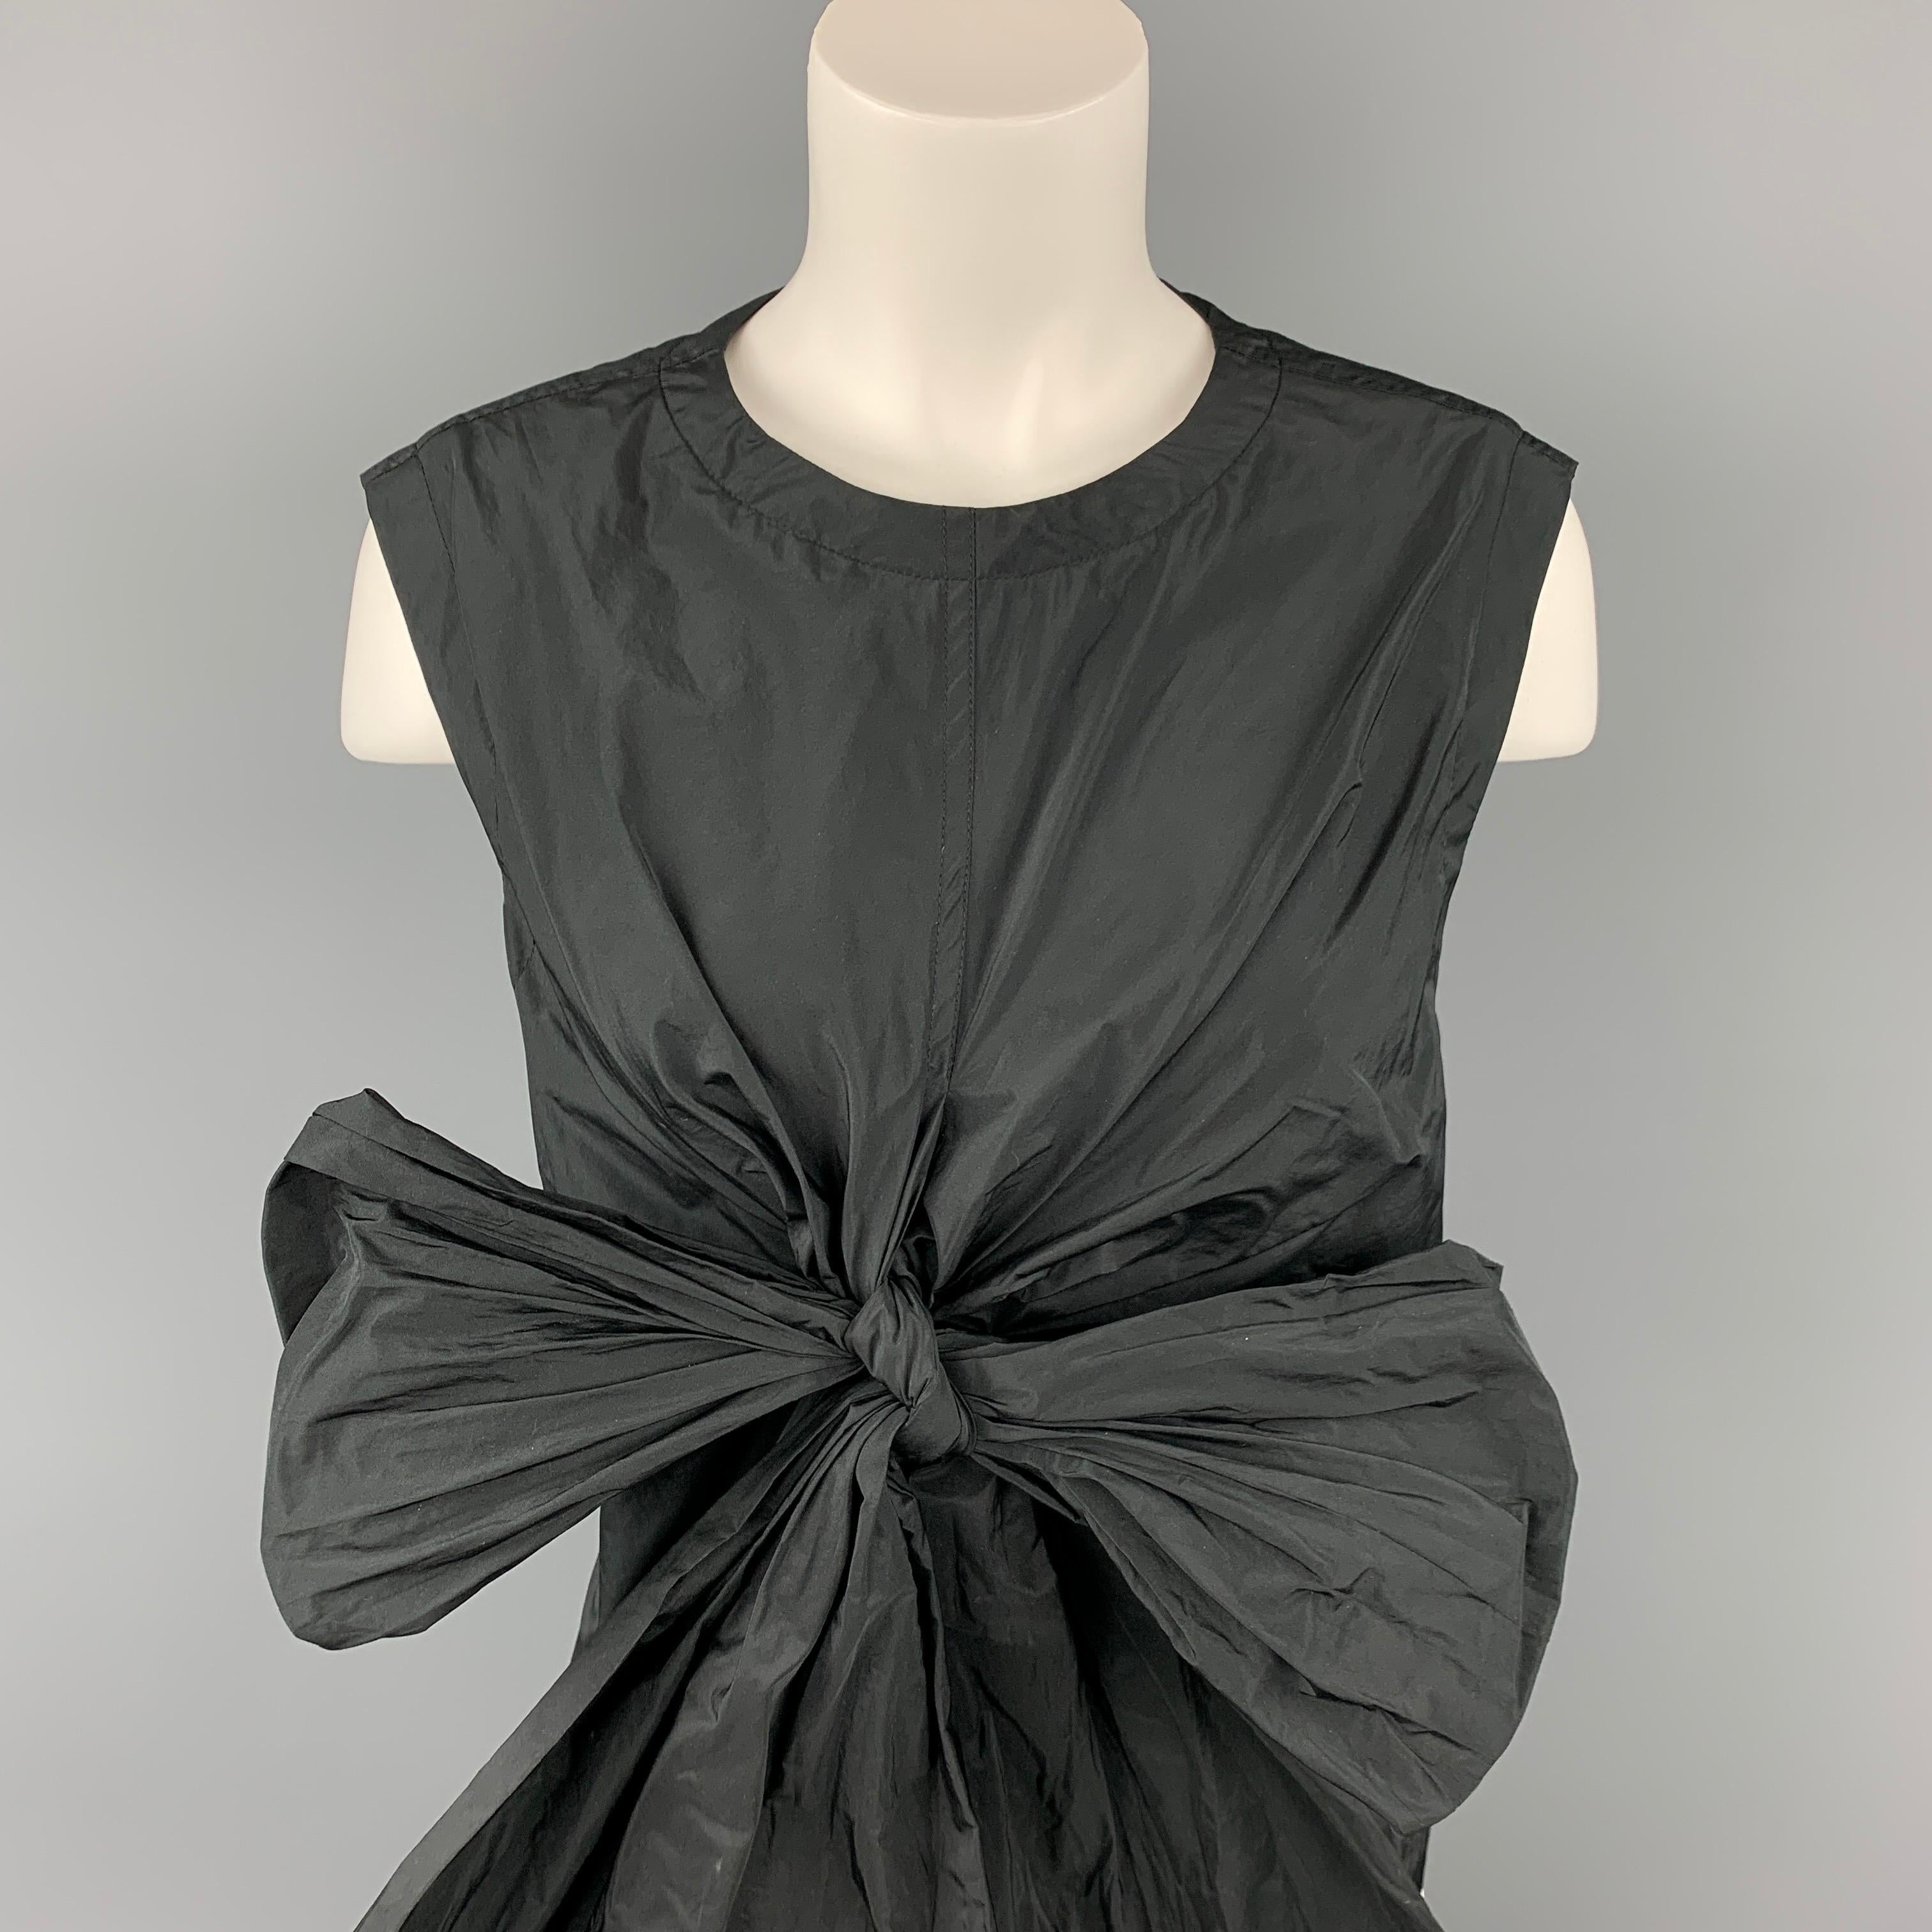 DRIES VAN NOTEN dress top comes in a black tafeta polyester featuring a oversized bow design, sleeveless, and a back zip up closure. Made in Belgium.

Very Good Pre-Owned Condition.
Marked: 40

Measurements:

Shoulder: 16.5 in.
Bust: 38 in.
Length: